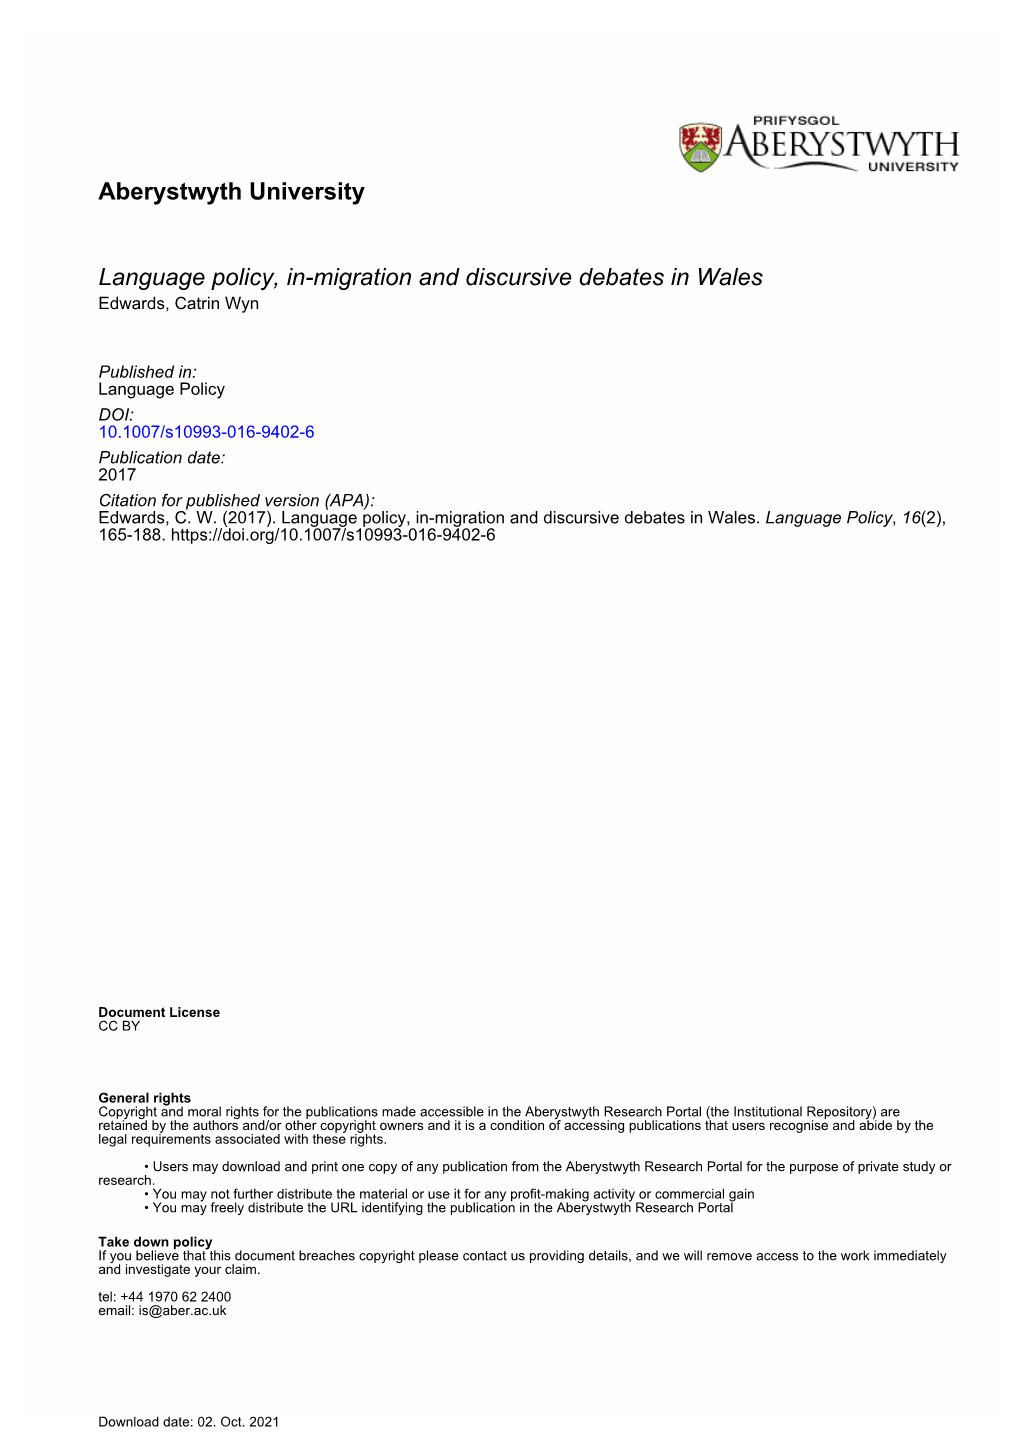 Aberystwyth University Language Policy, In-Migration and Discursive Debates in Wales